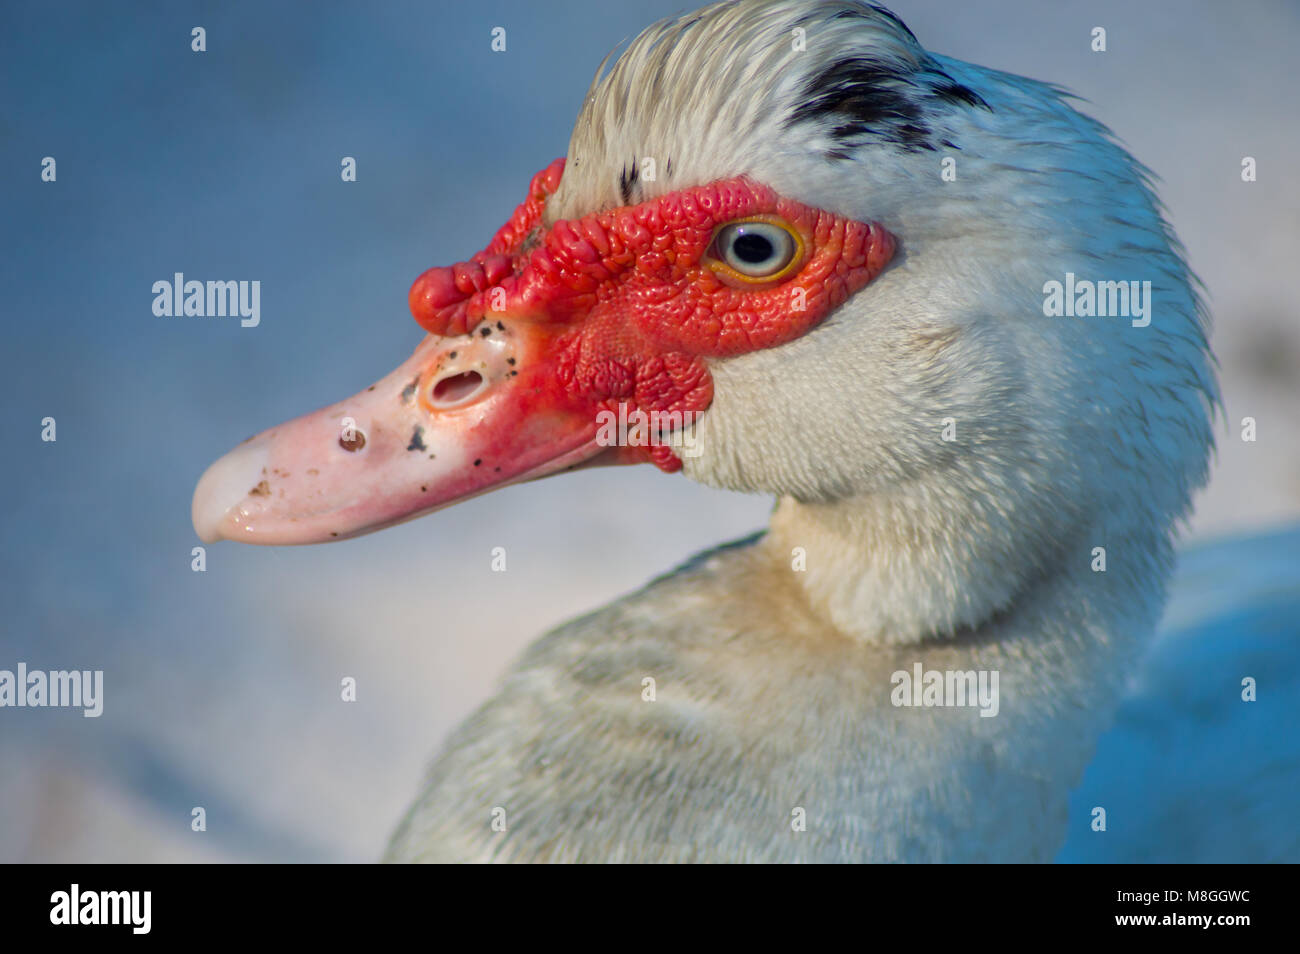 Muscovy duck close up. This beautiful duck has blue eyes and the the specs of black on his feathers and bill makes him unique. Stock Photo